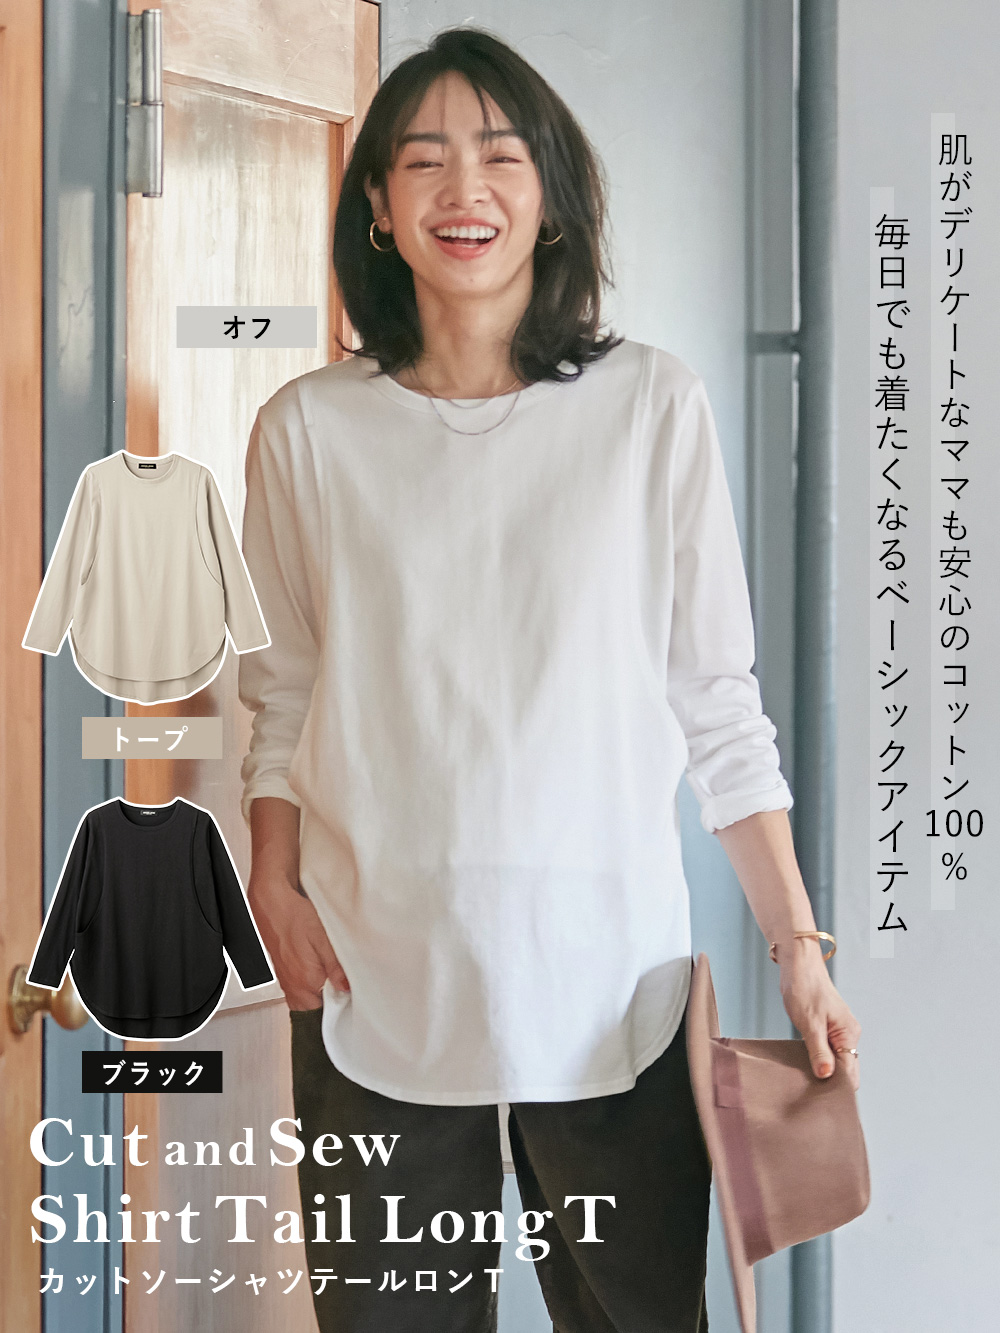  maternity clothes tops cut and sewn shirt tail long T nursing clothes .. clothes long sleeve maternity tops 